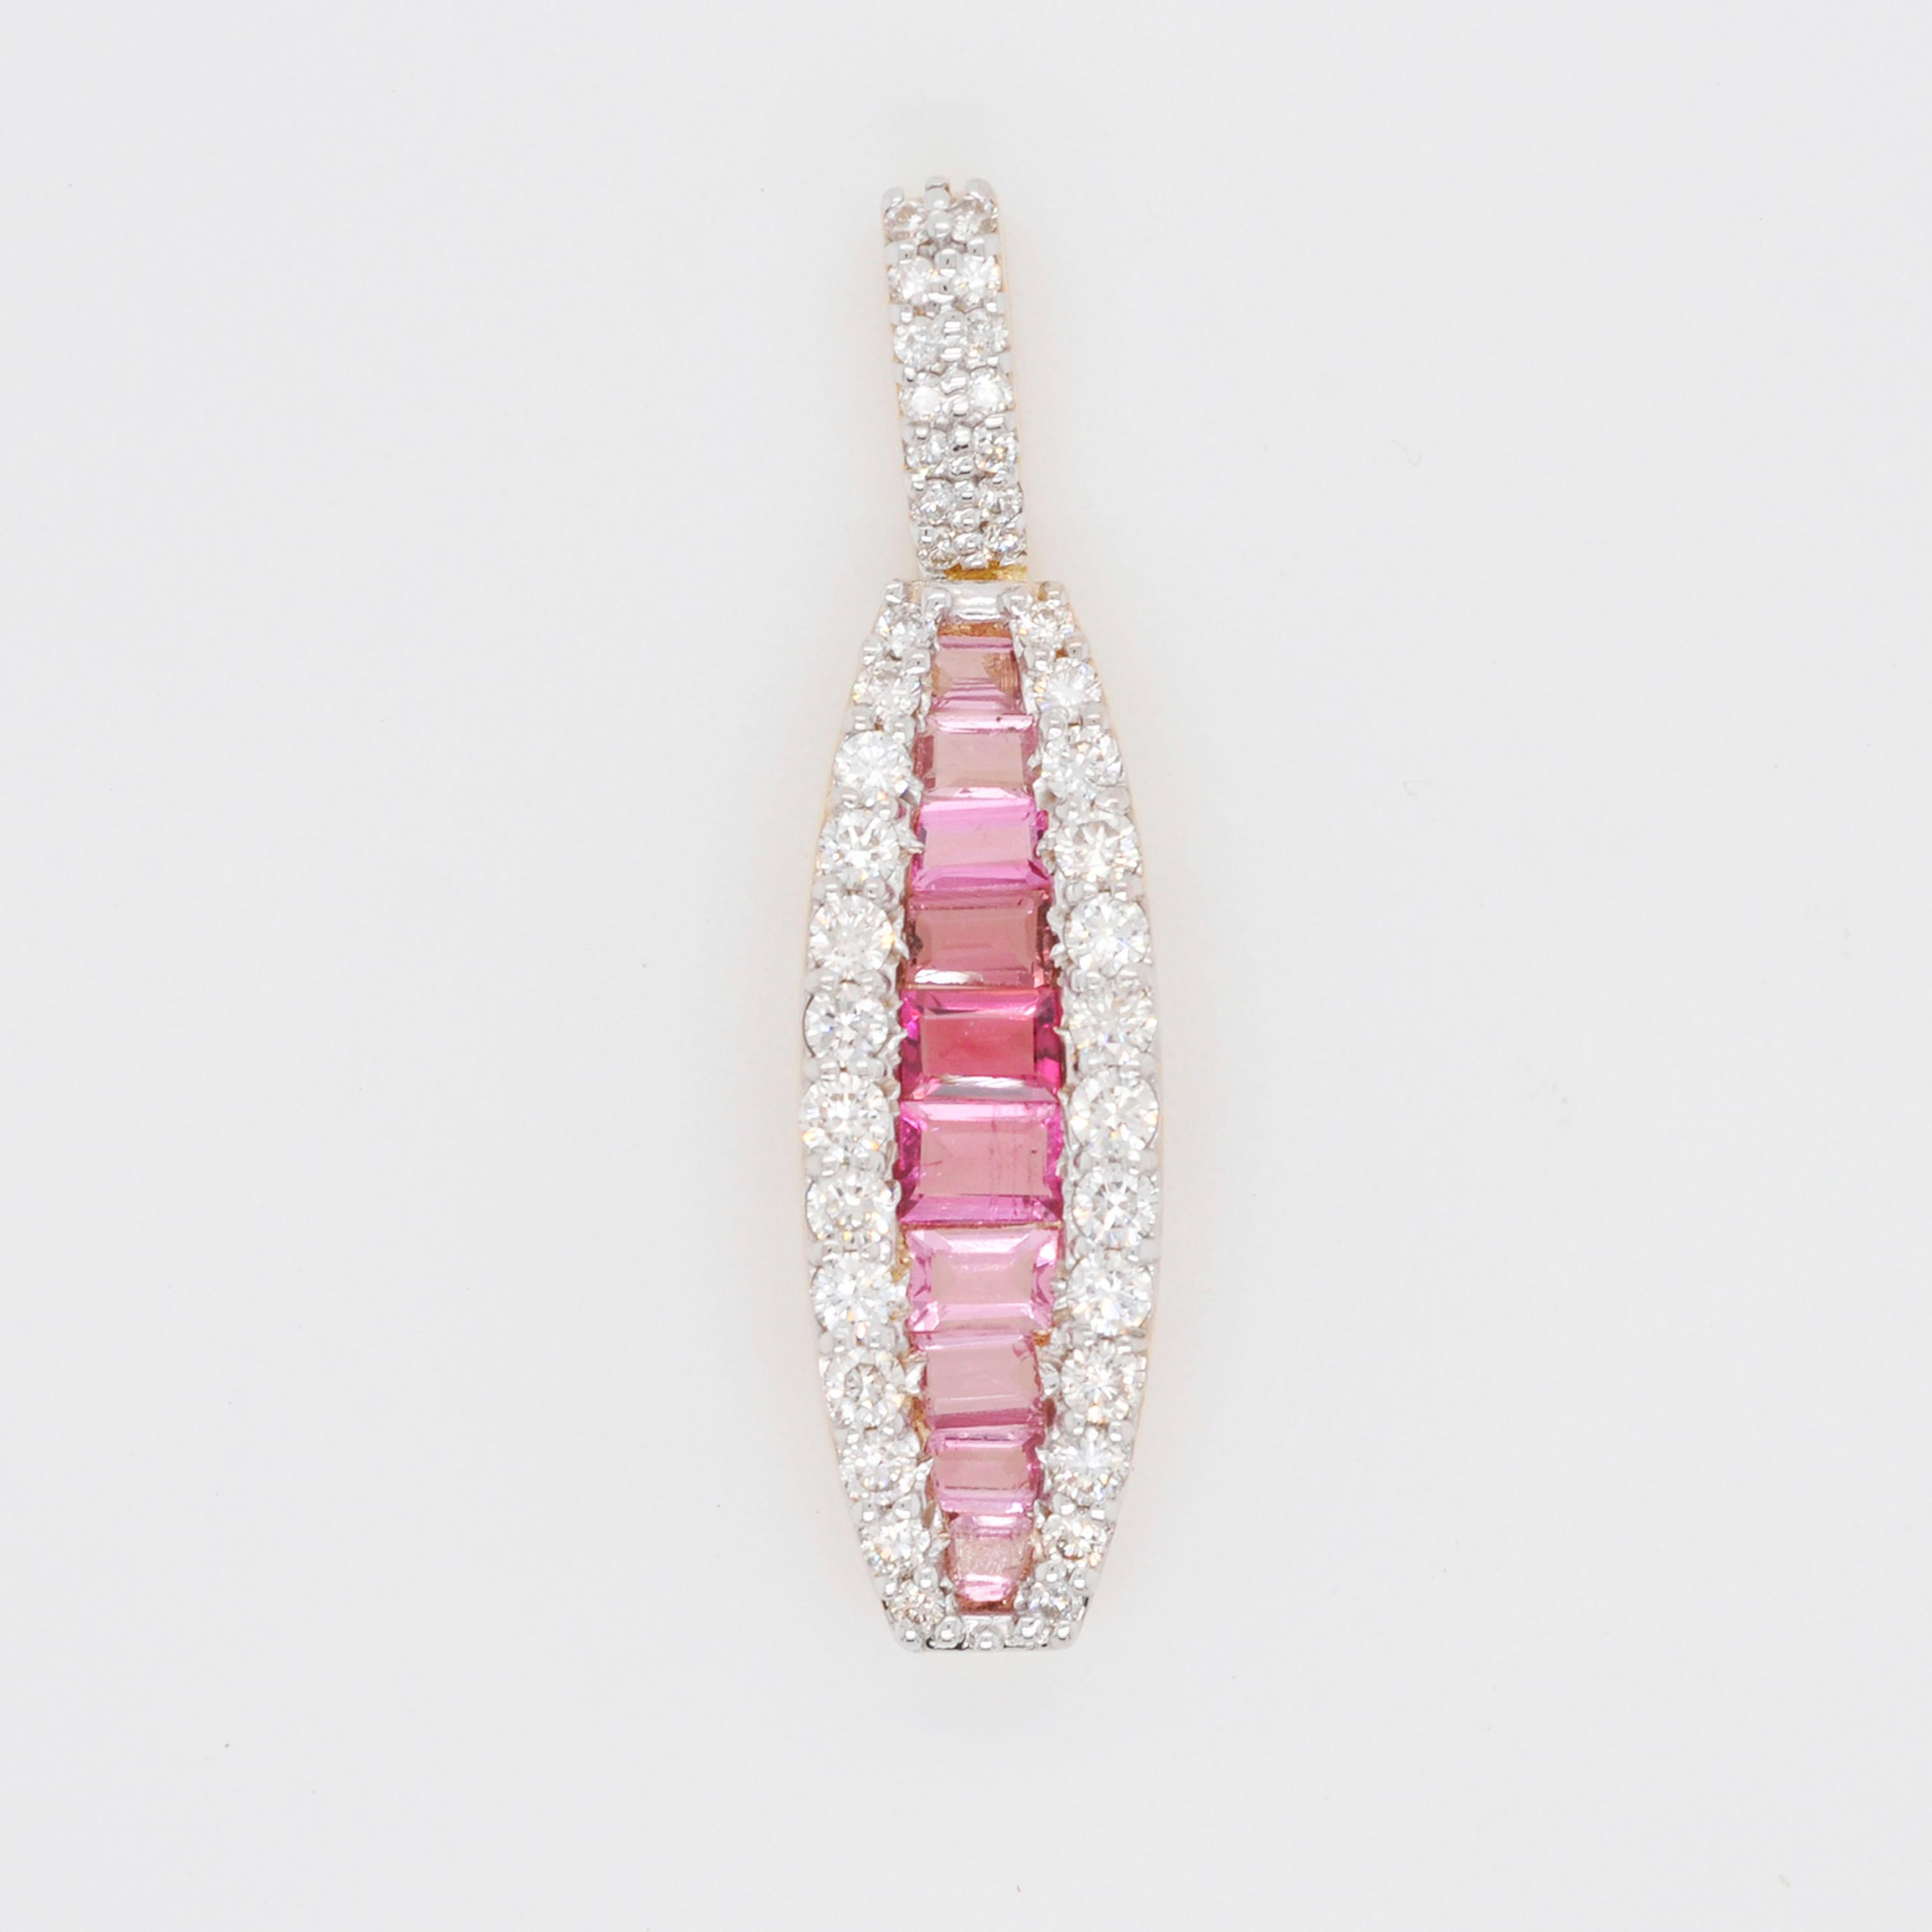 18 karat gold channel set pink tourmaline baguette diamond linear pendant necklace.

The enchanting pendant with the shades of pink tourmalines incorporated within an equivalent layer of micro pave set diamonds on either is distinctive in its very